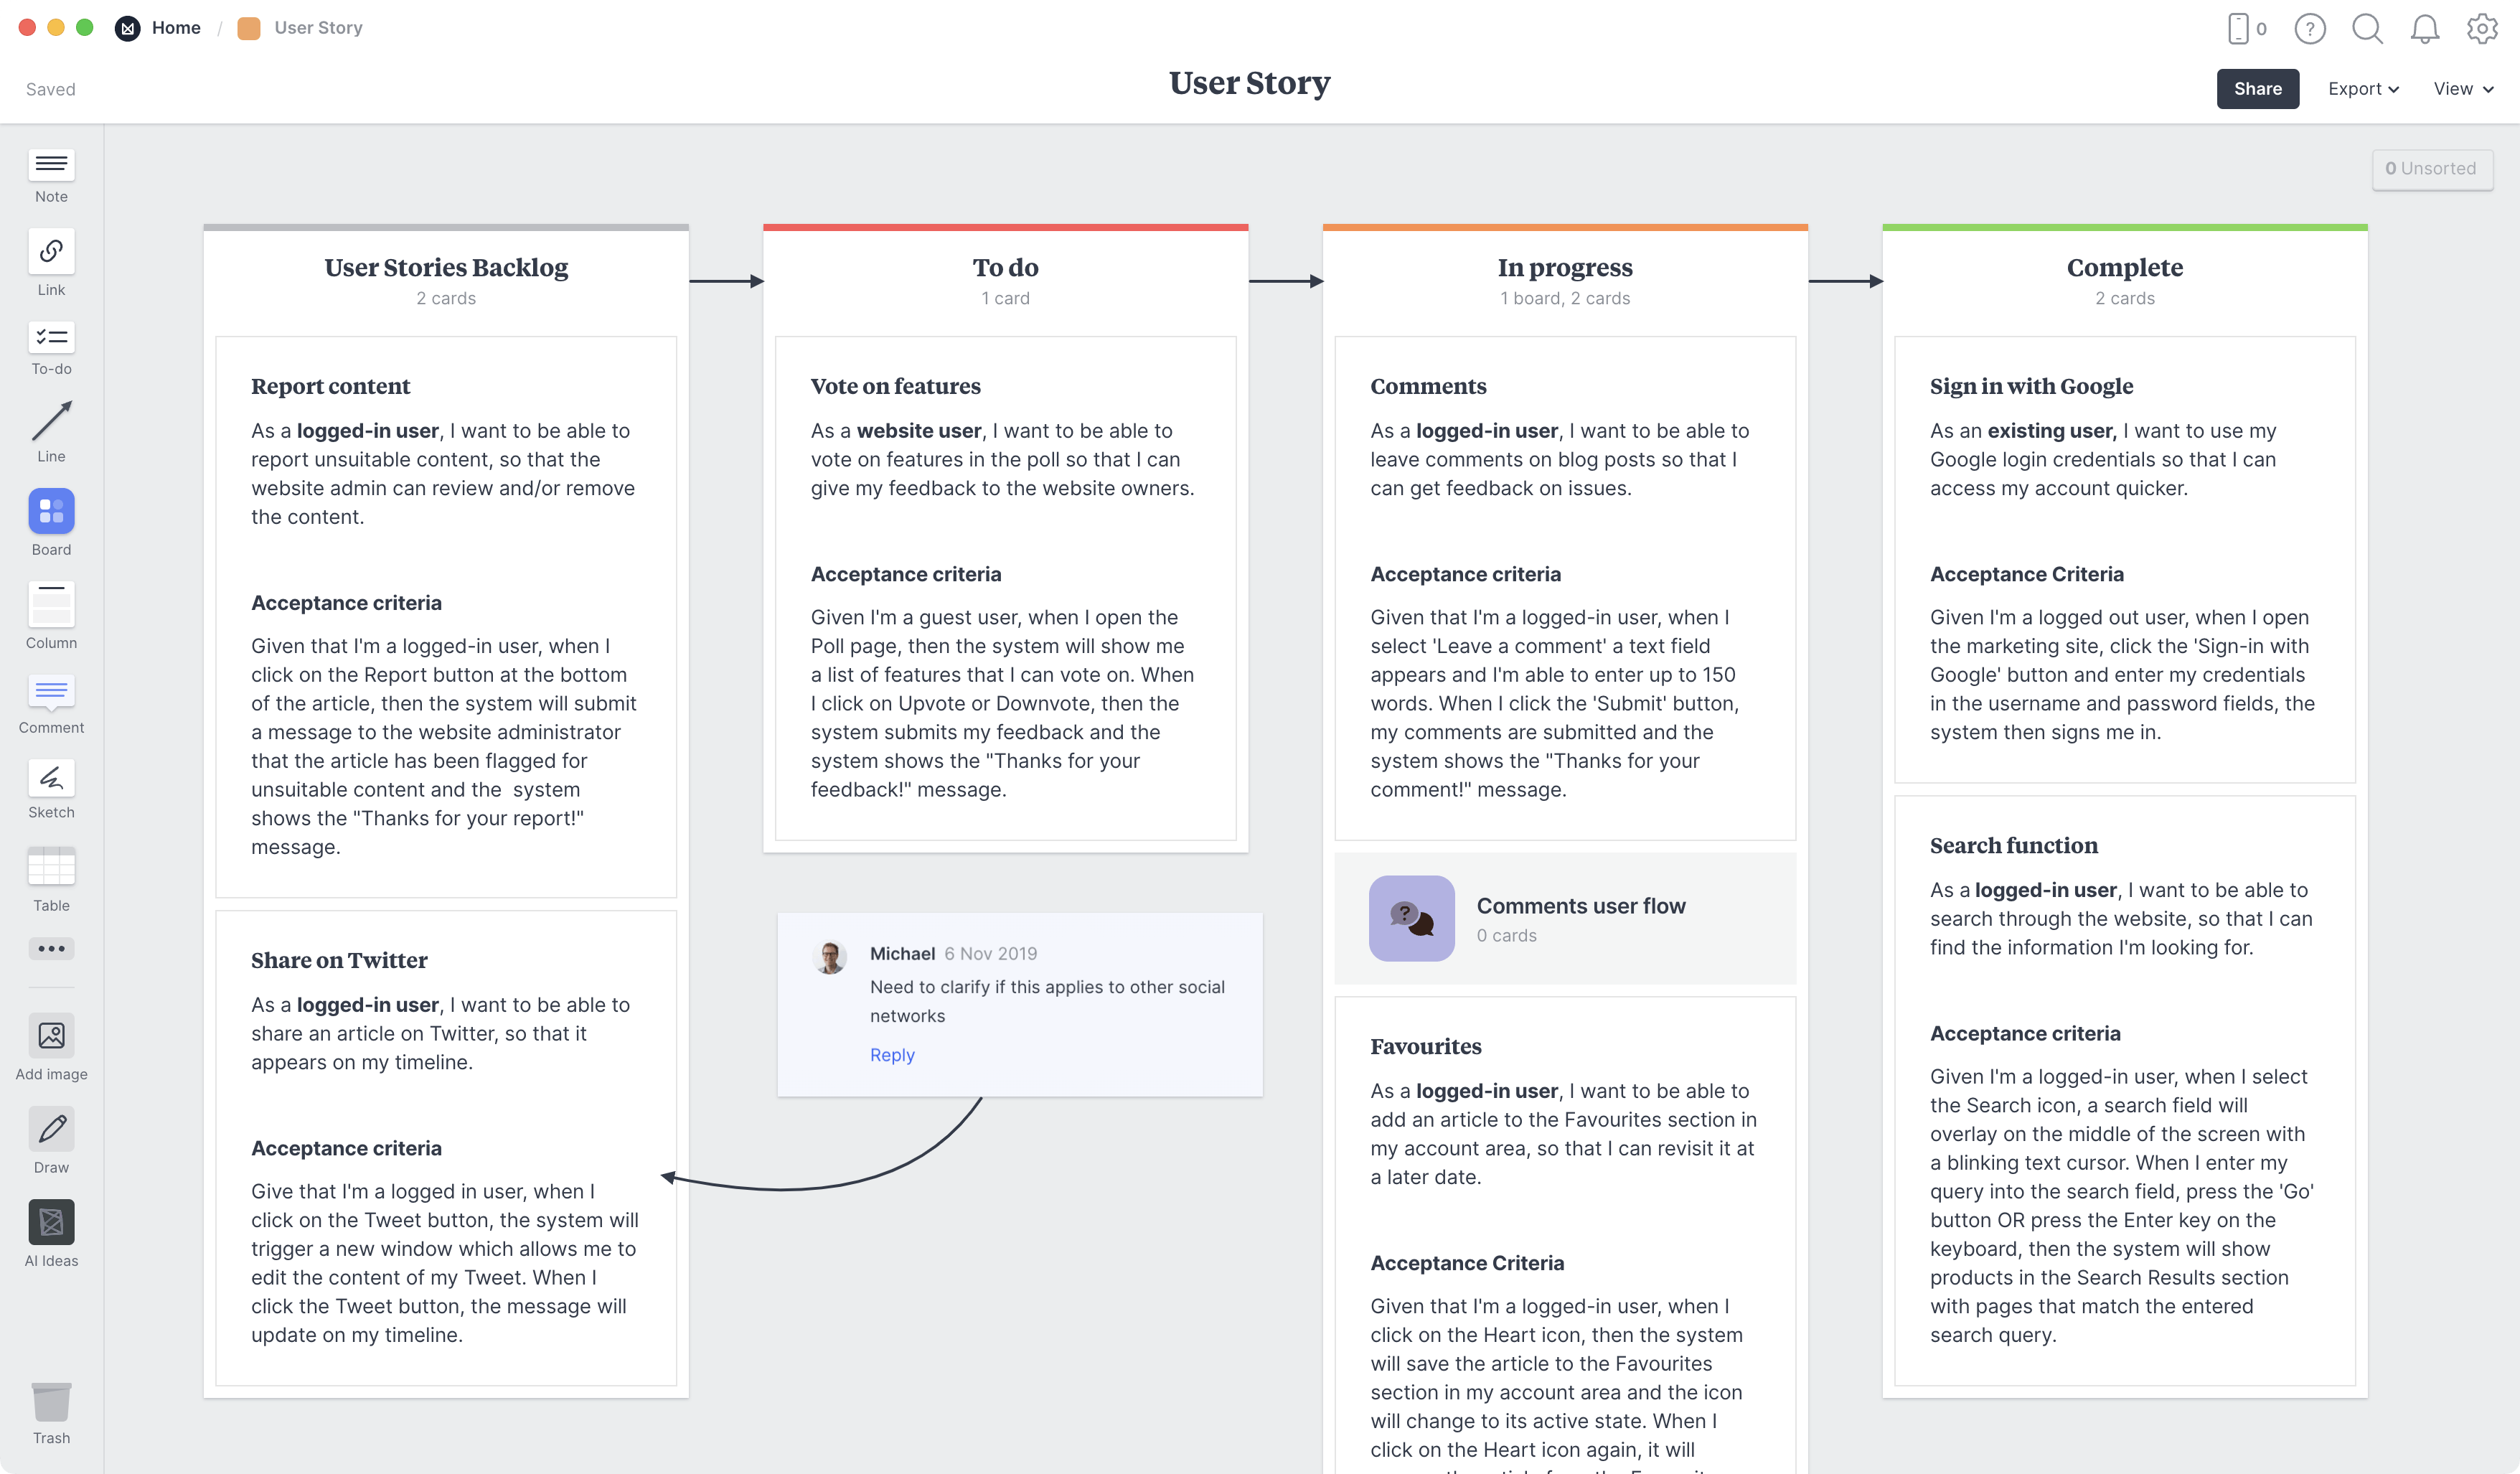 Story Map Template - Center Circle